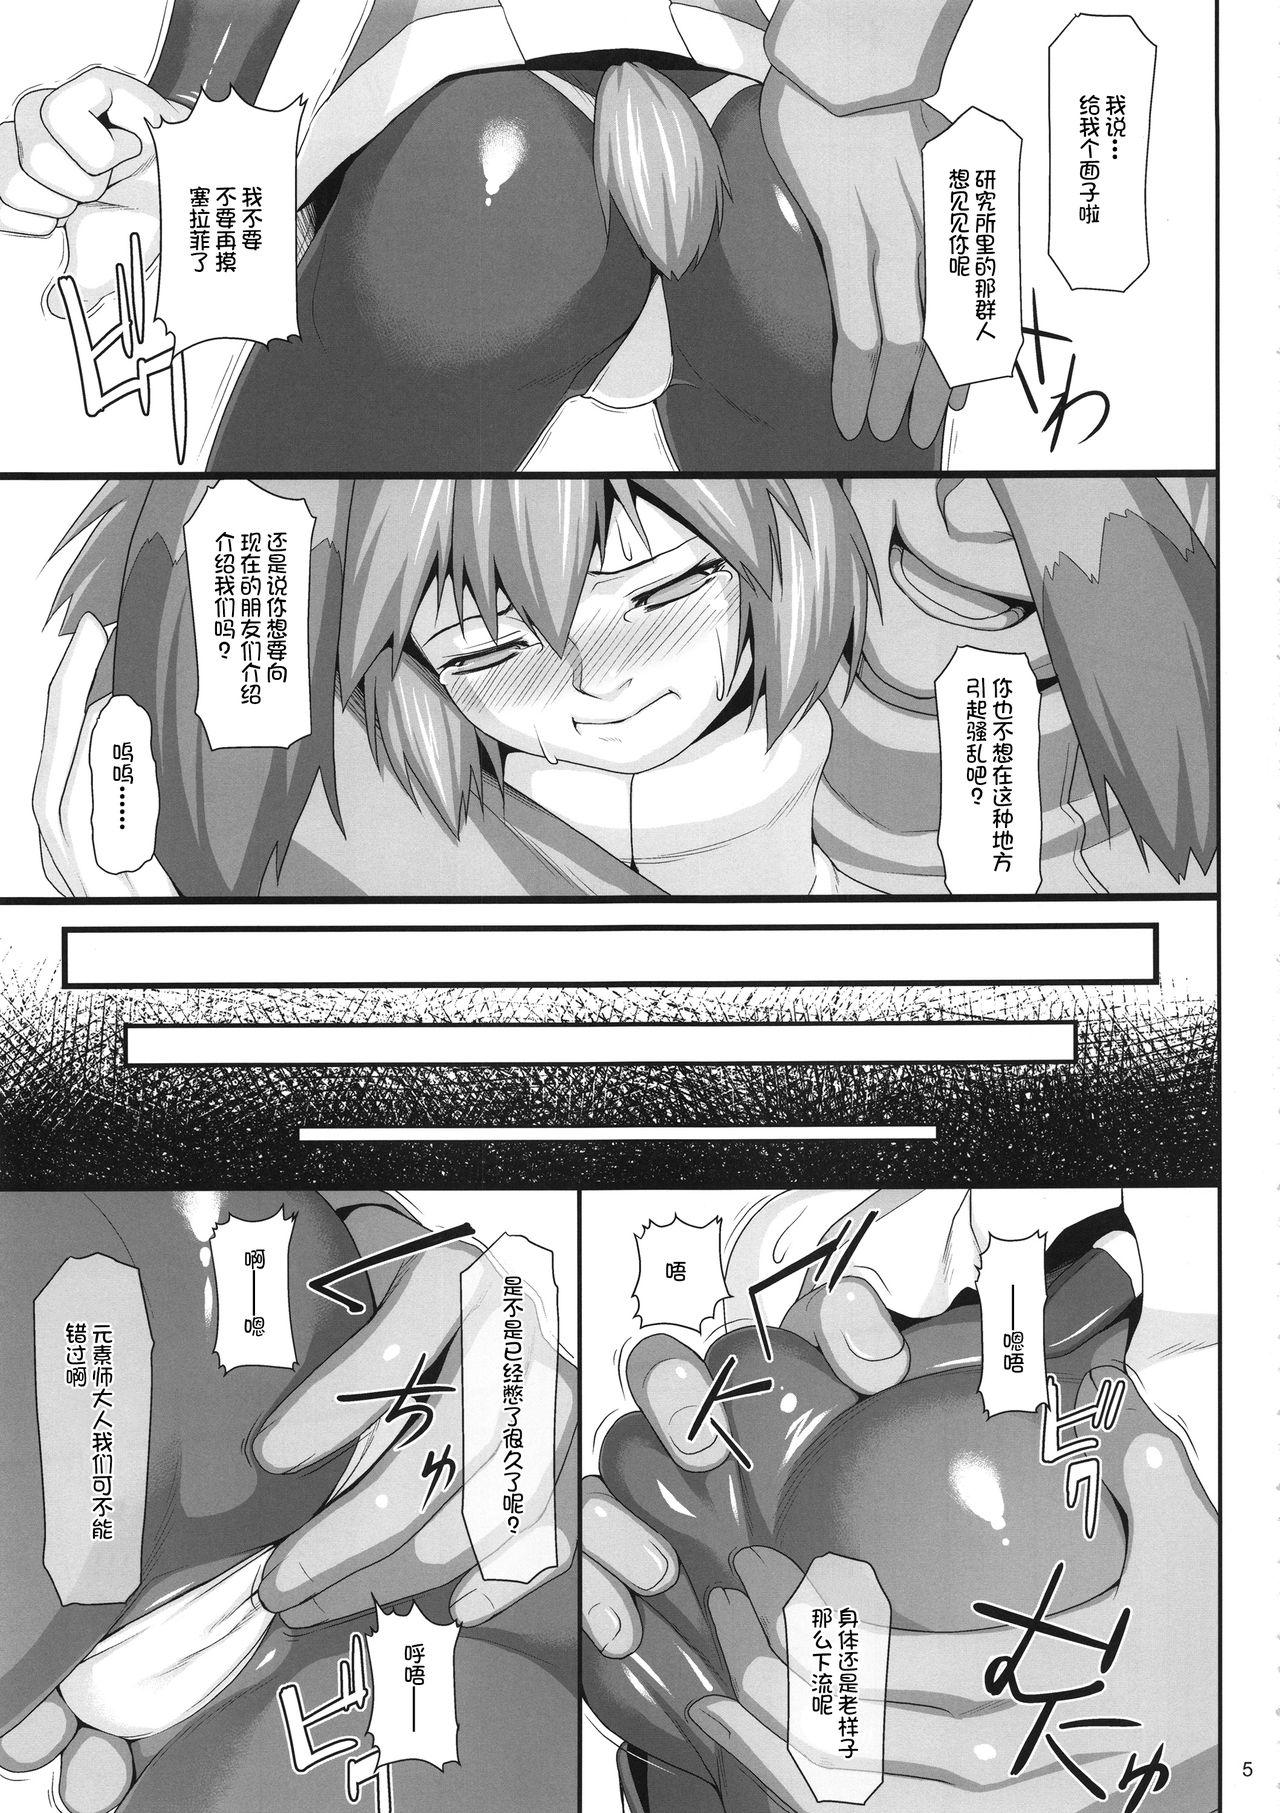 Nudity Seraphic Gate 4 - Xenogears Big Ass - Page 5